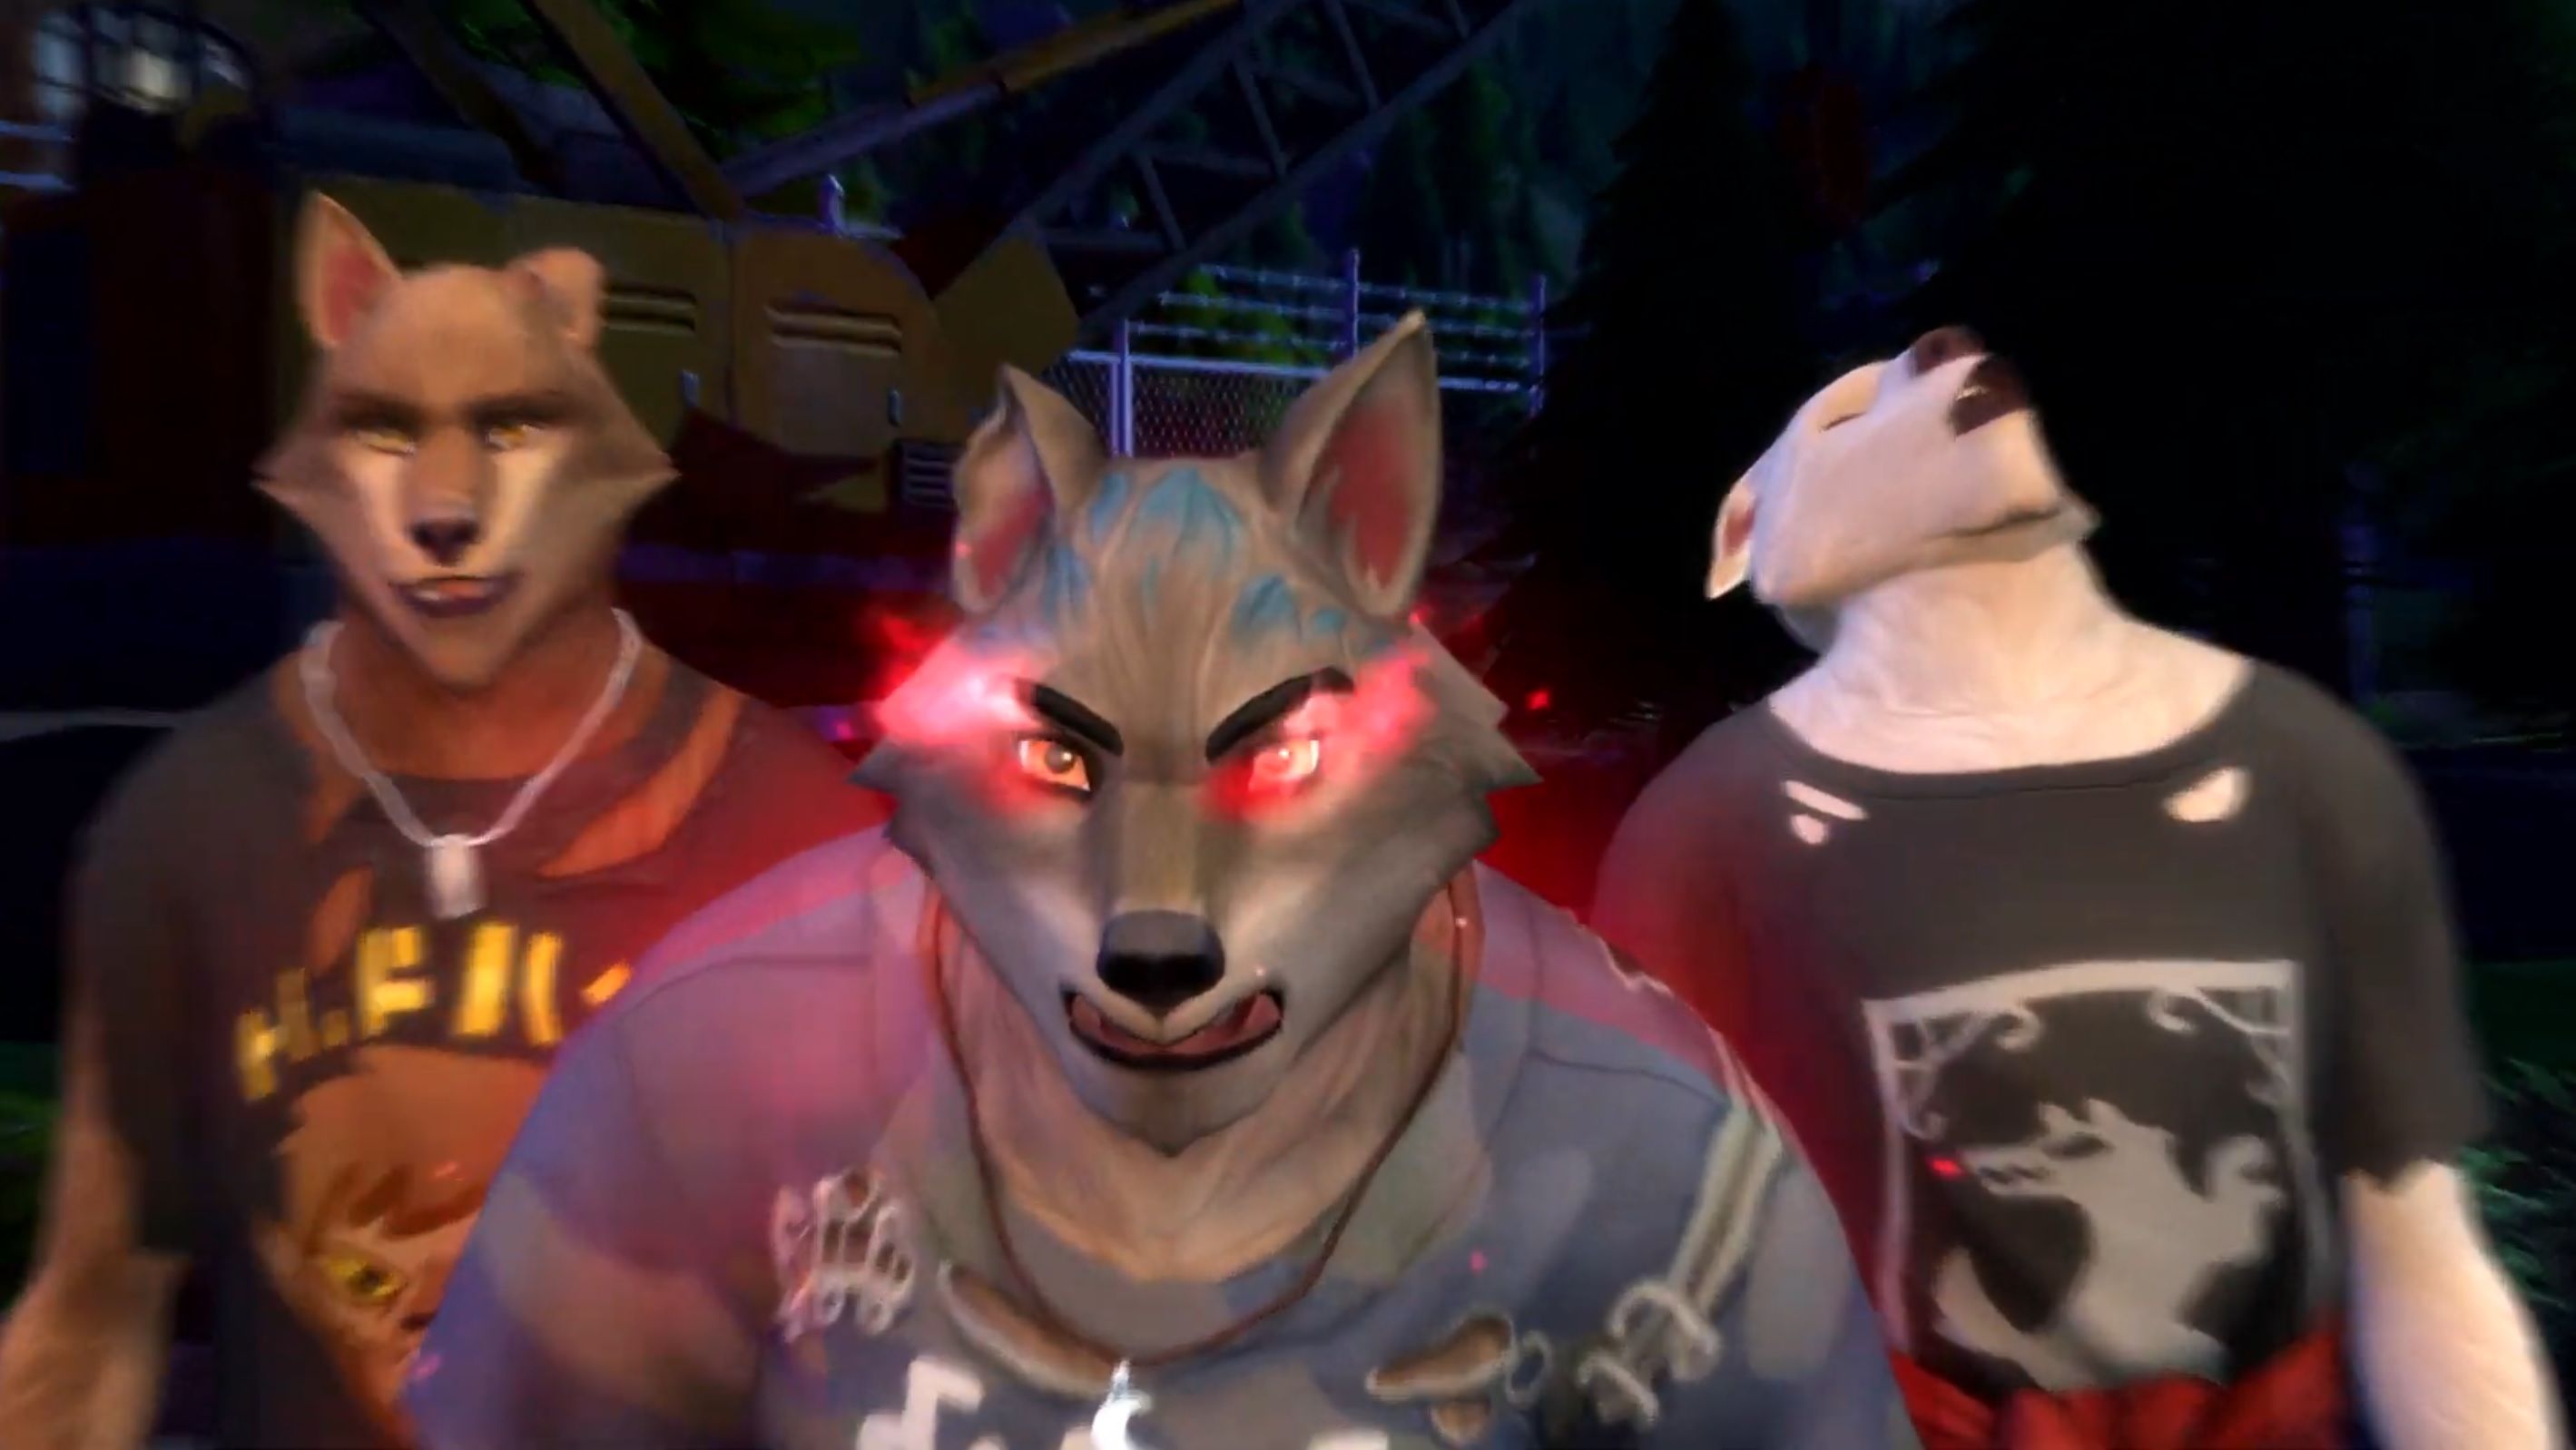 Sims 4 Werewolves Game Pack Out Now: Everything to Know - CNET